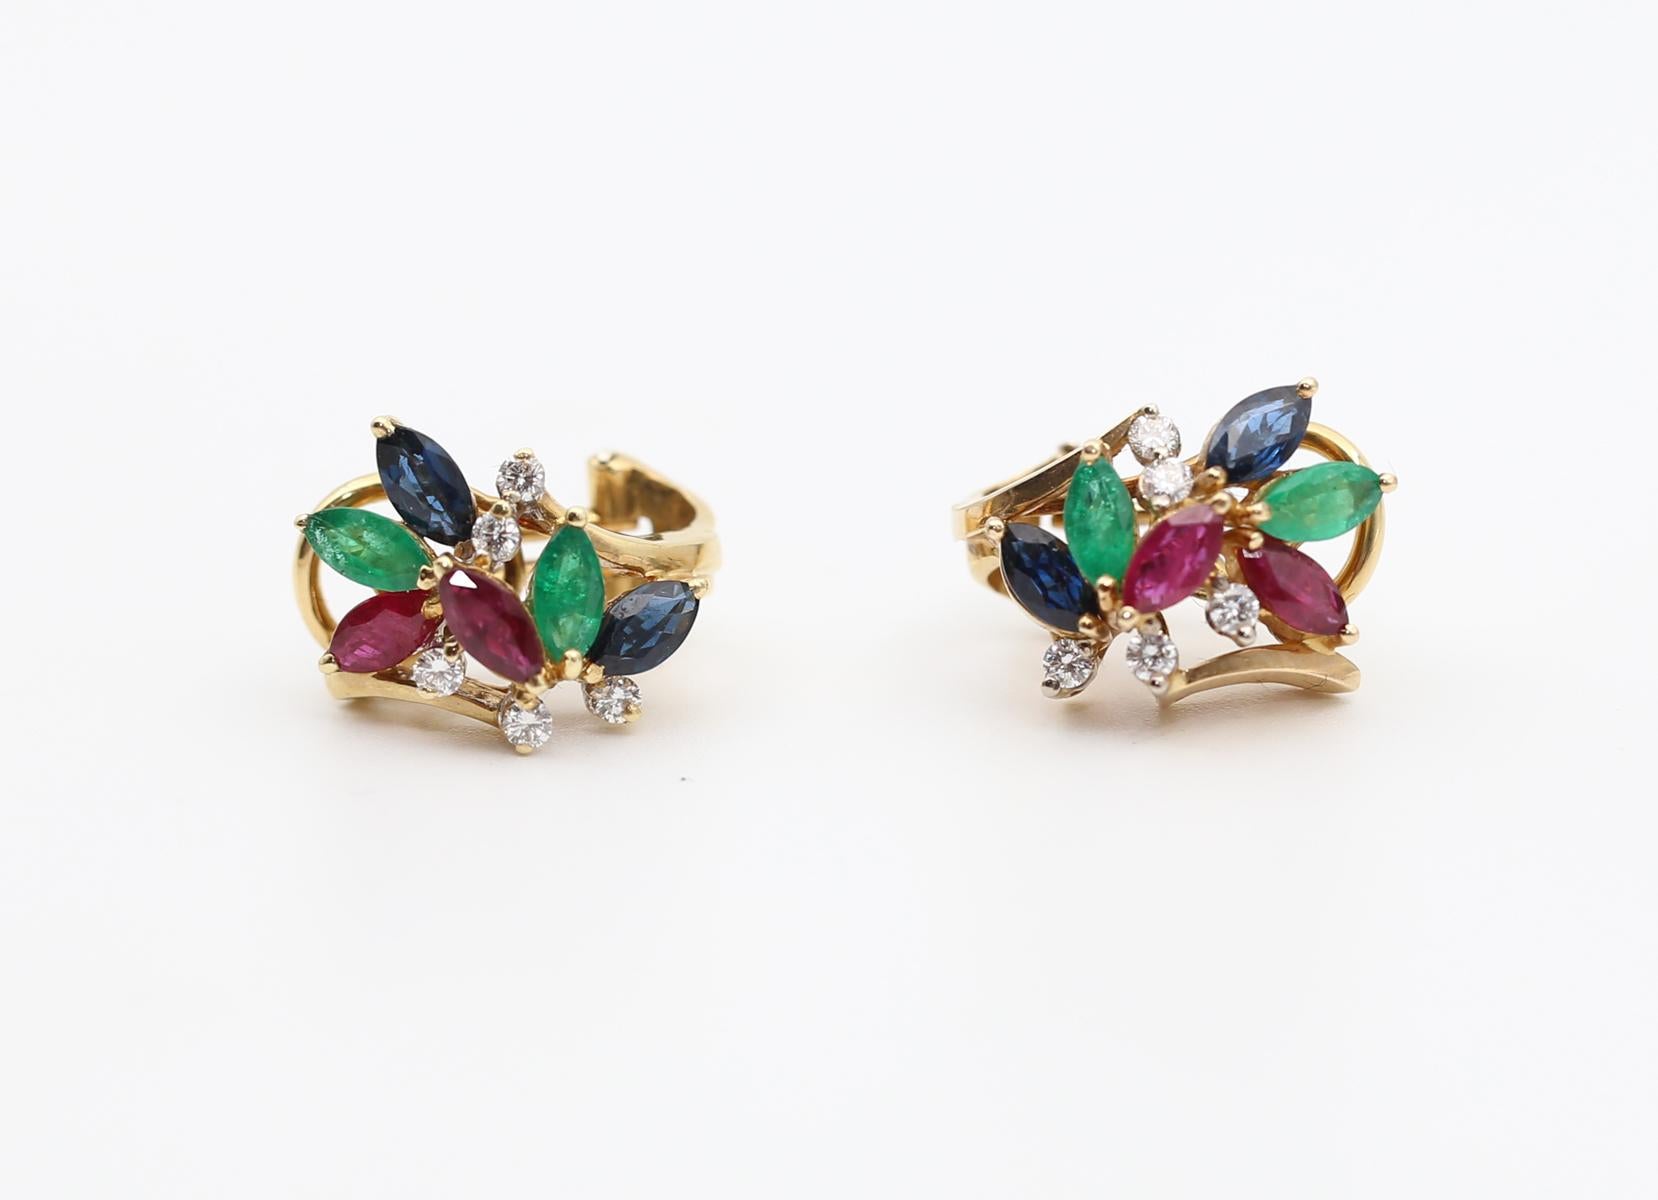 18K Gold Earrings Diamonds Emeralds Sapphires Natural Motive, Created around 2000 

A luxurious and spectacularly beautiful 18K gold earrings set with white Diamonds, Emeralds, Sapphires, and Rubies in a marquise cut with very beautiful colors,